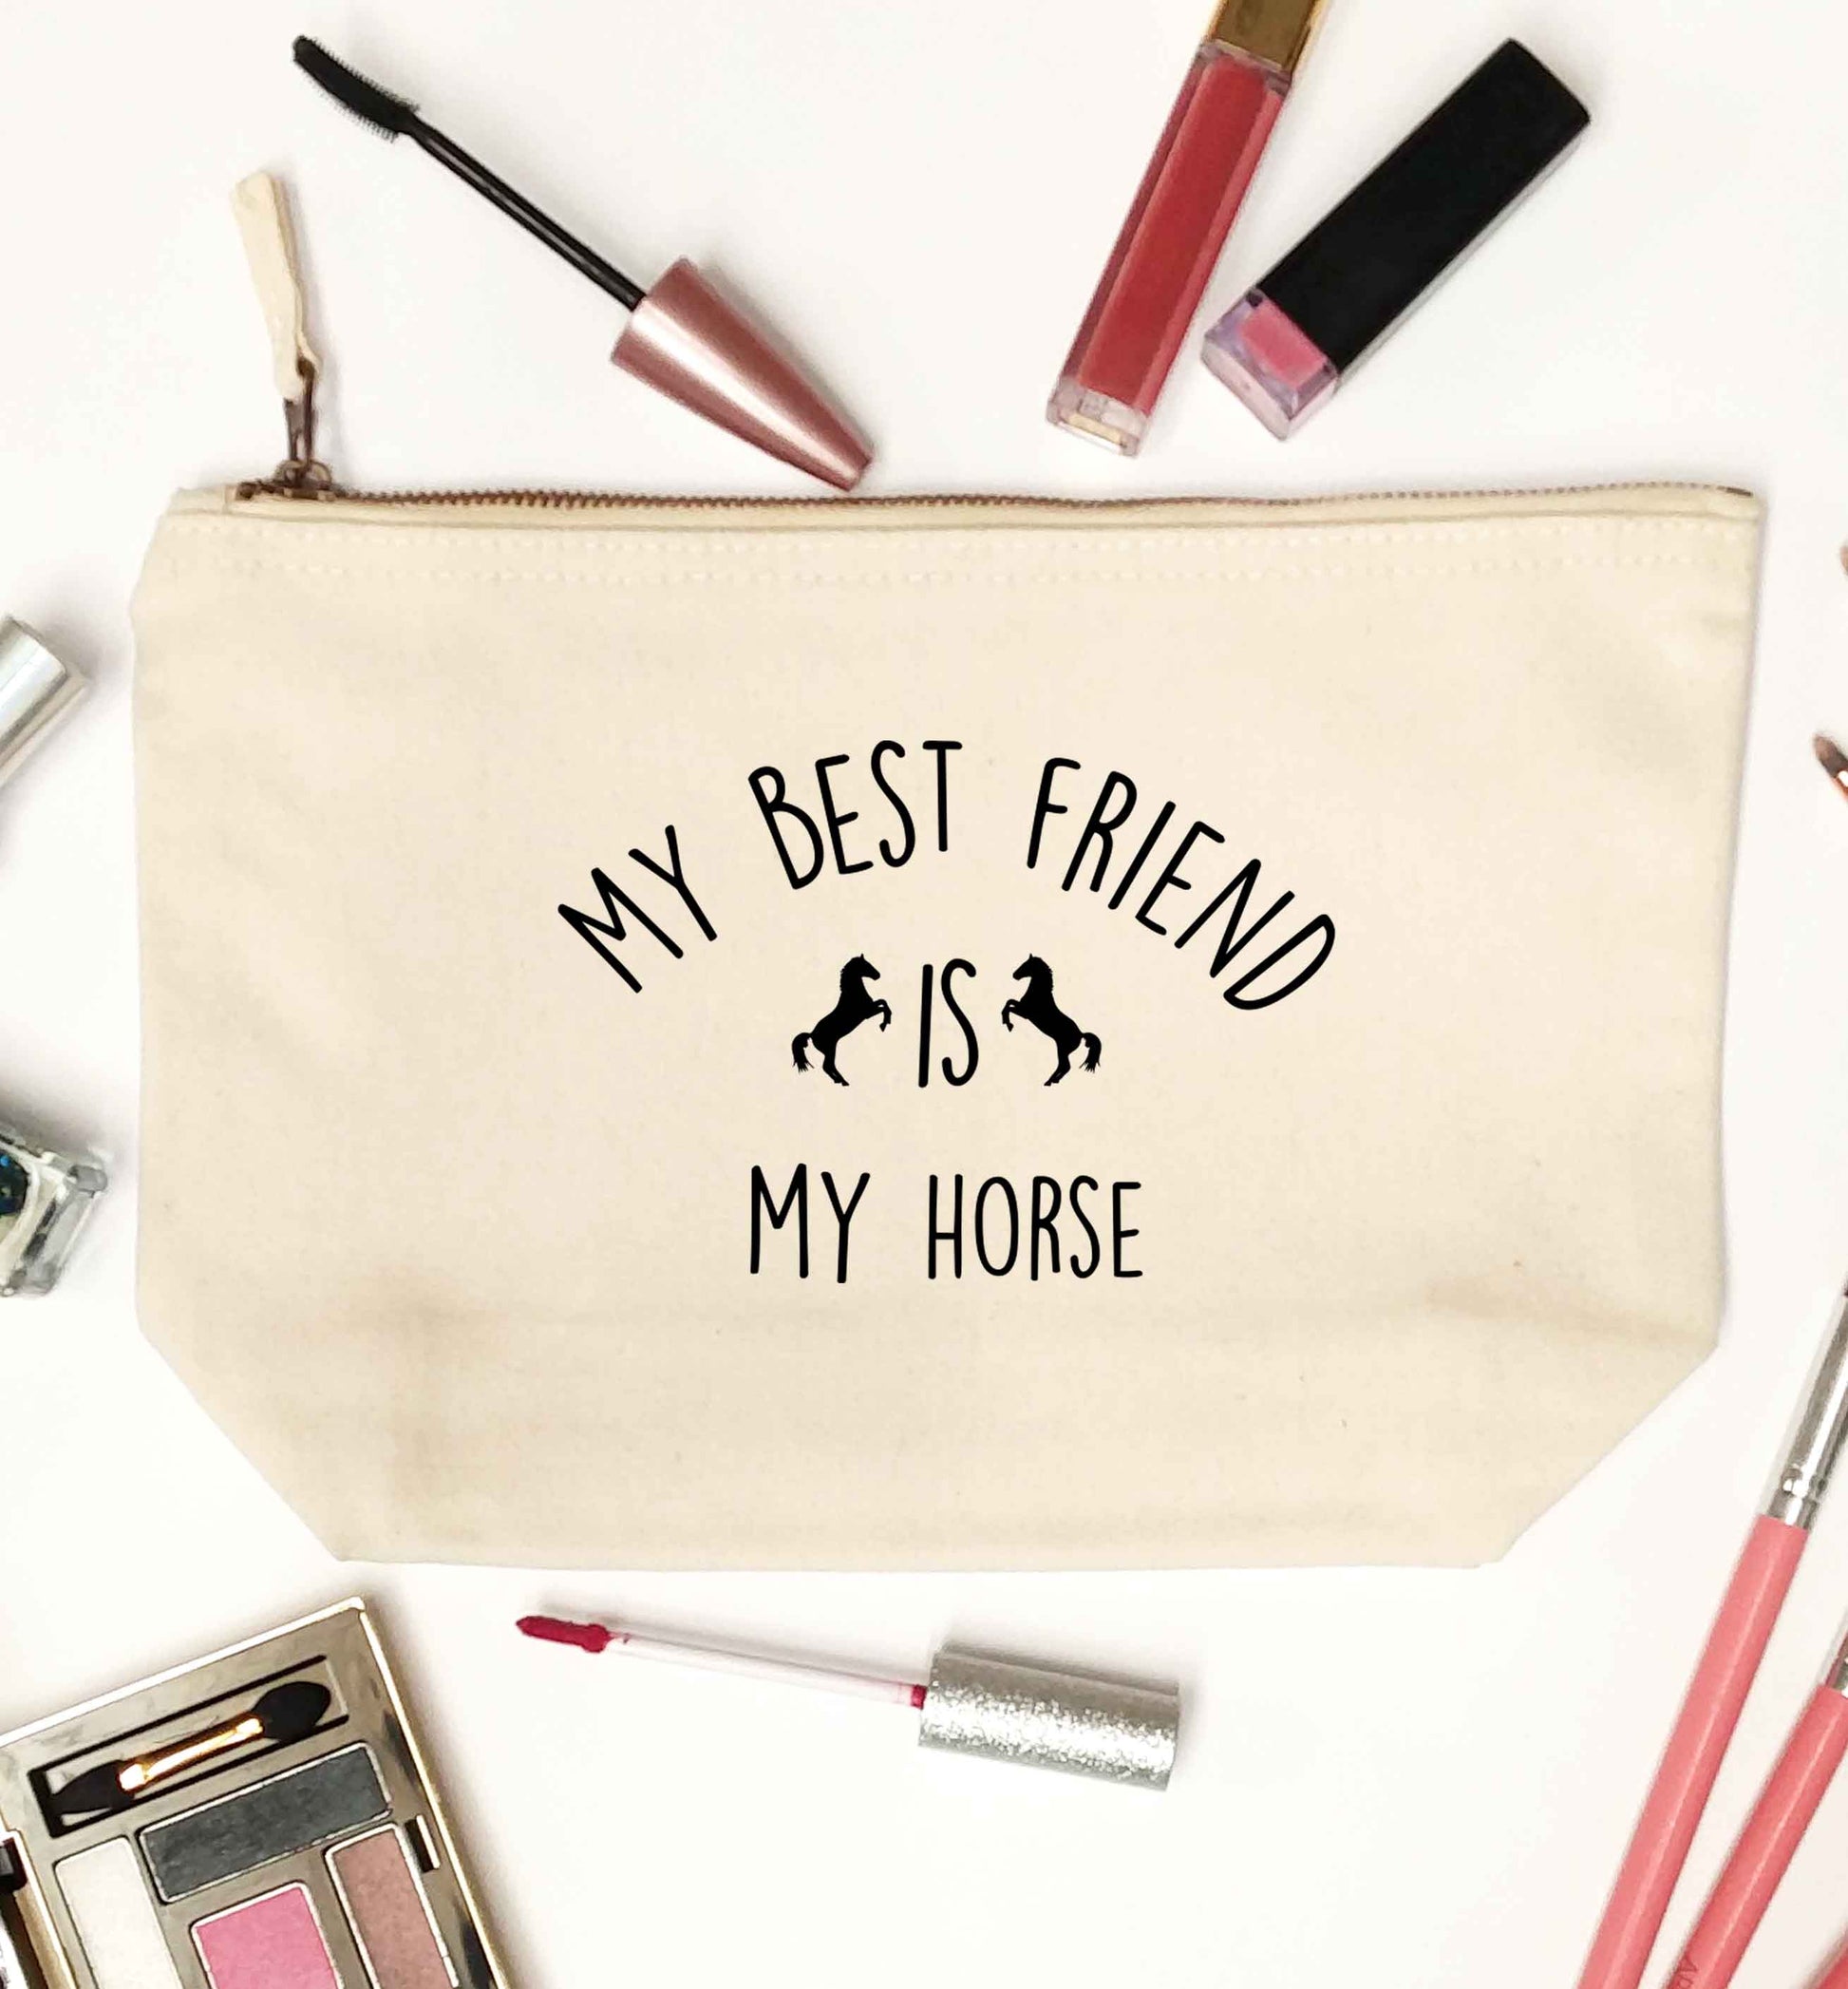 My best friend is my horse natural makeup bag